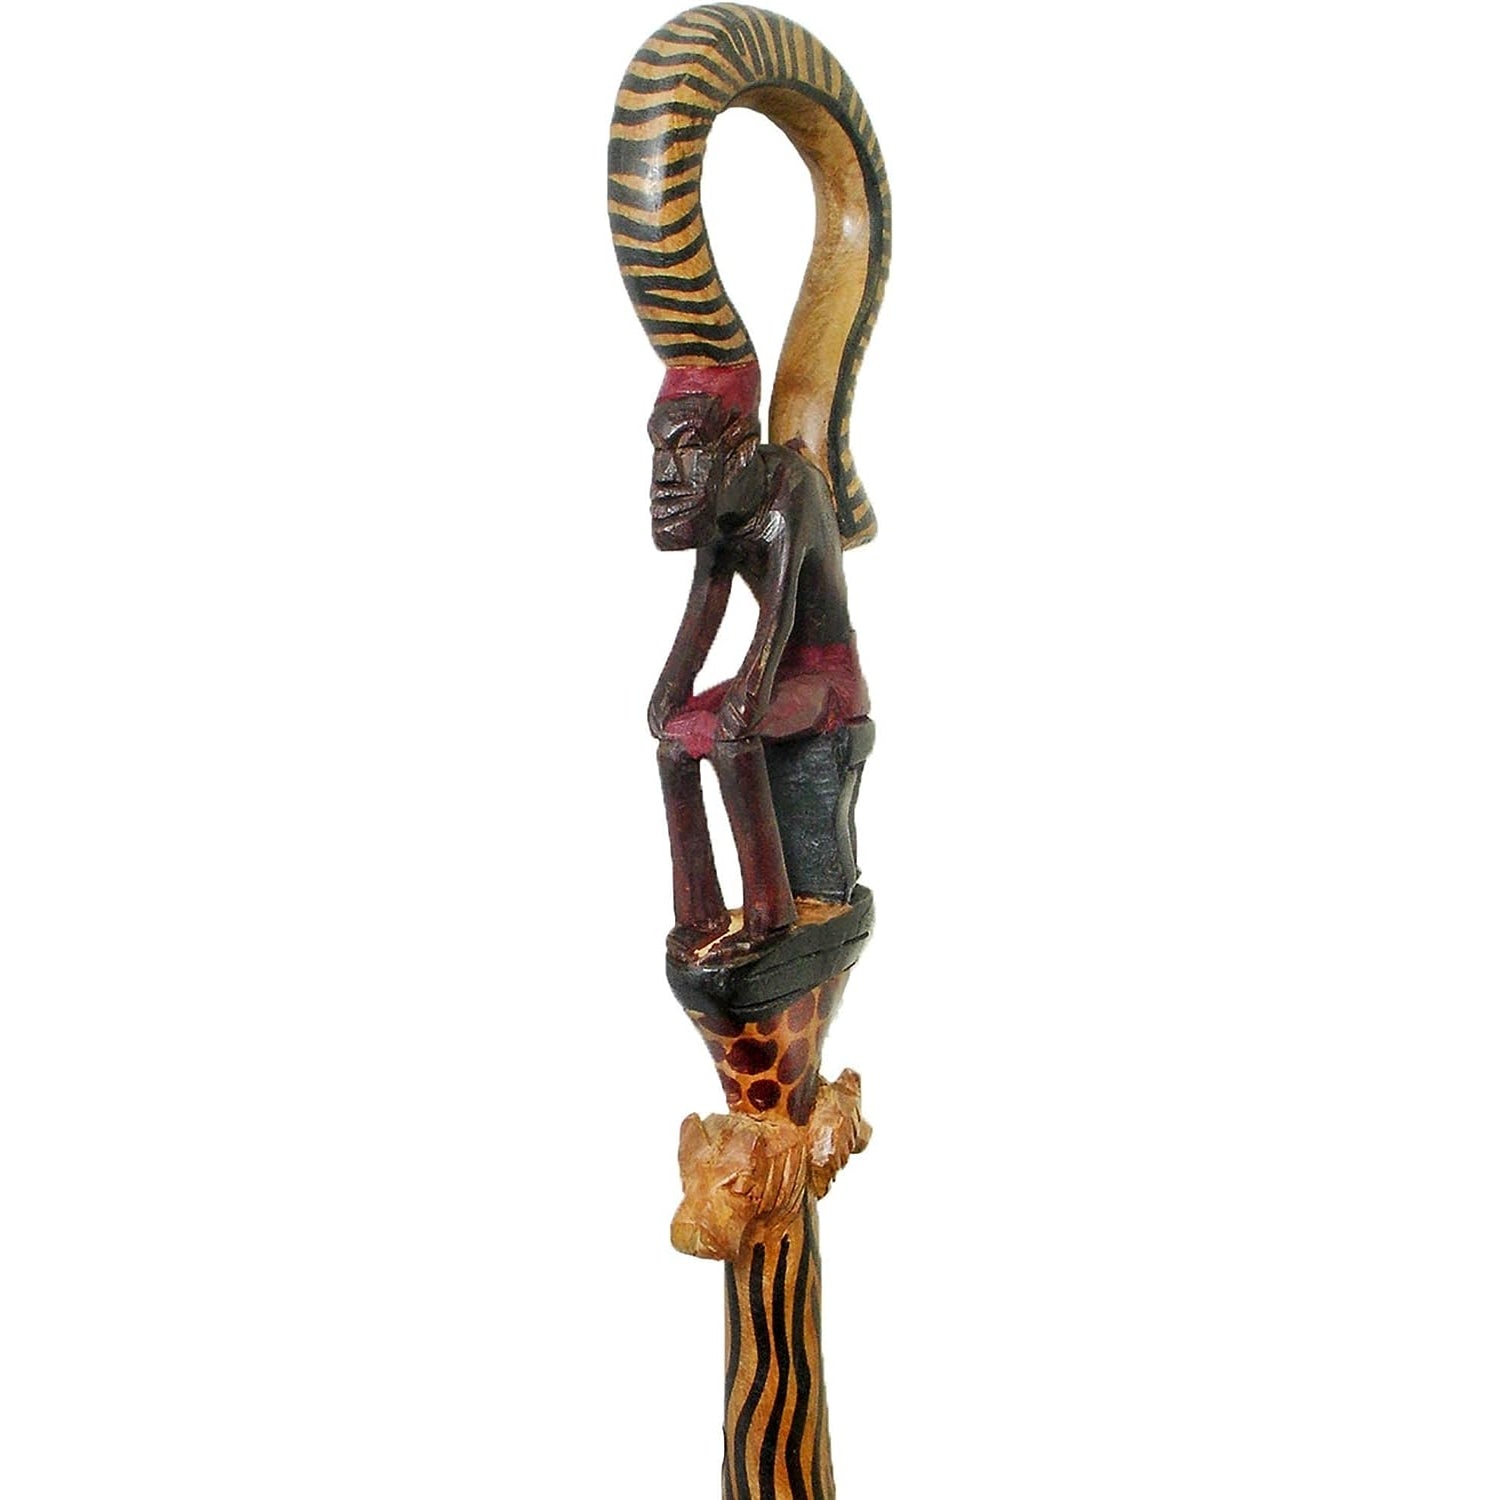 3 of 3: Authentic Hand Crafted African Wiseman and Lion Head Decorative Wood Walking Stick (Close Up)